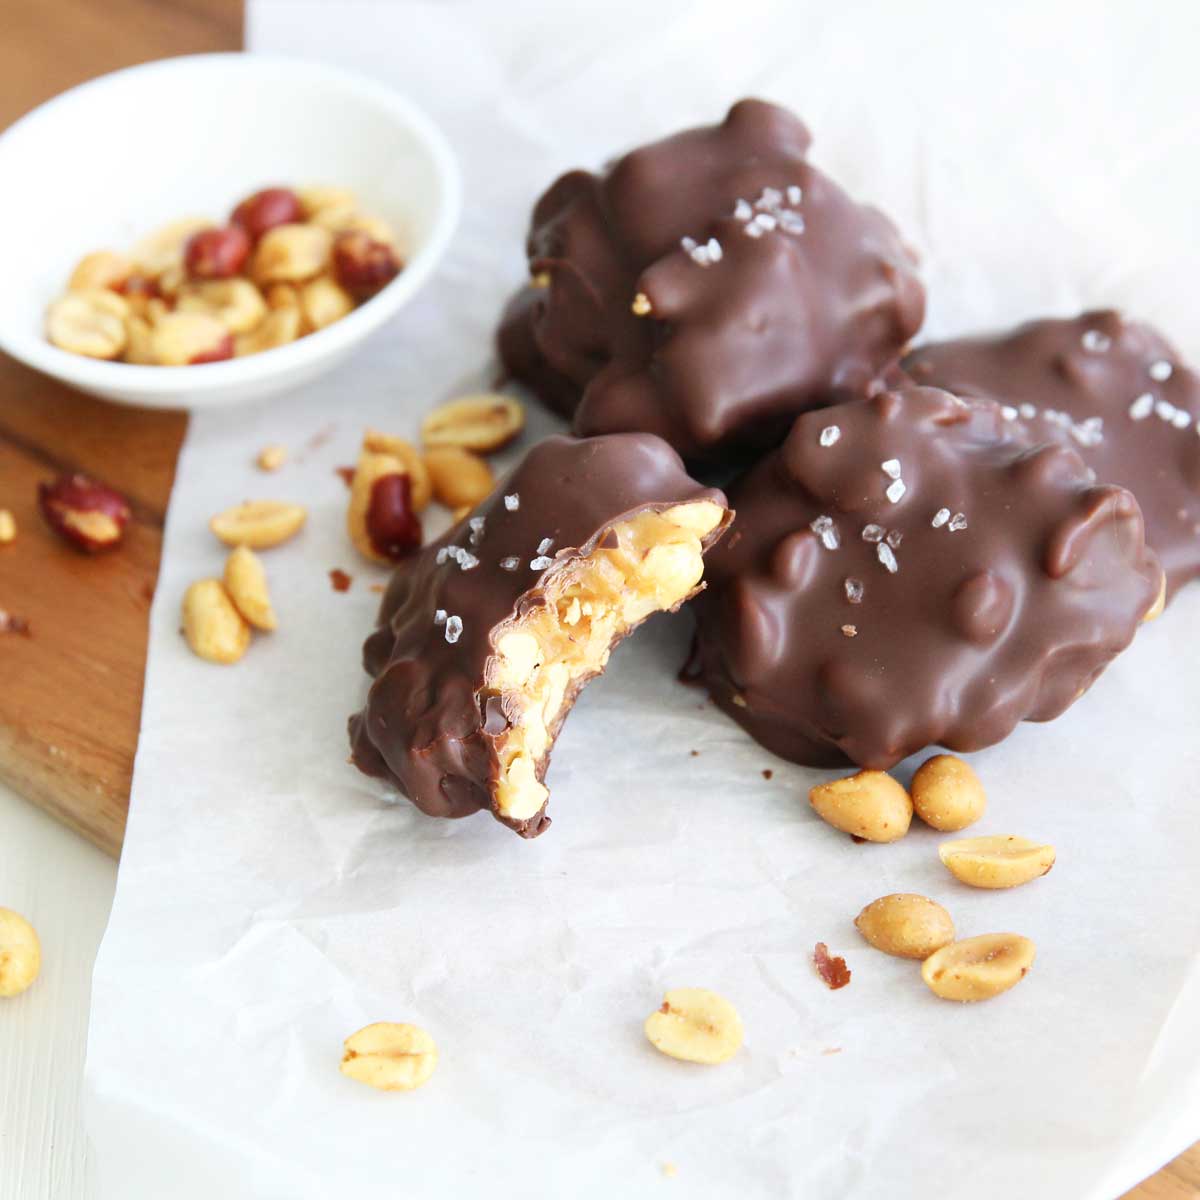 Chocolate Peanut Clusters with Collagen Caramel Filling (Easy, Keto Recipe) - Pecan Pie Bars